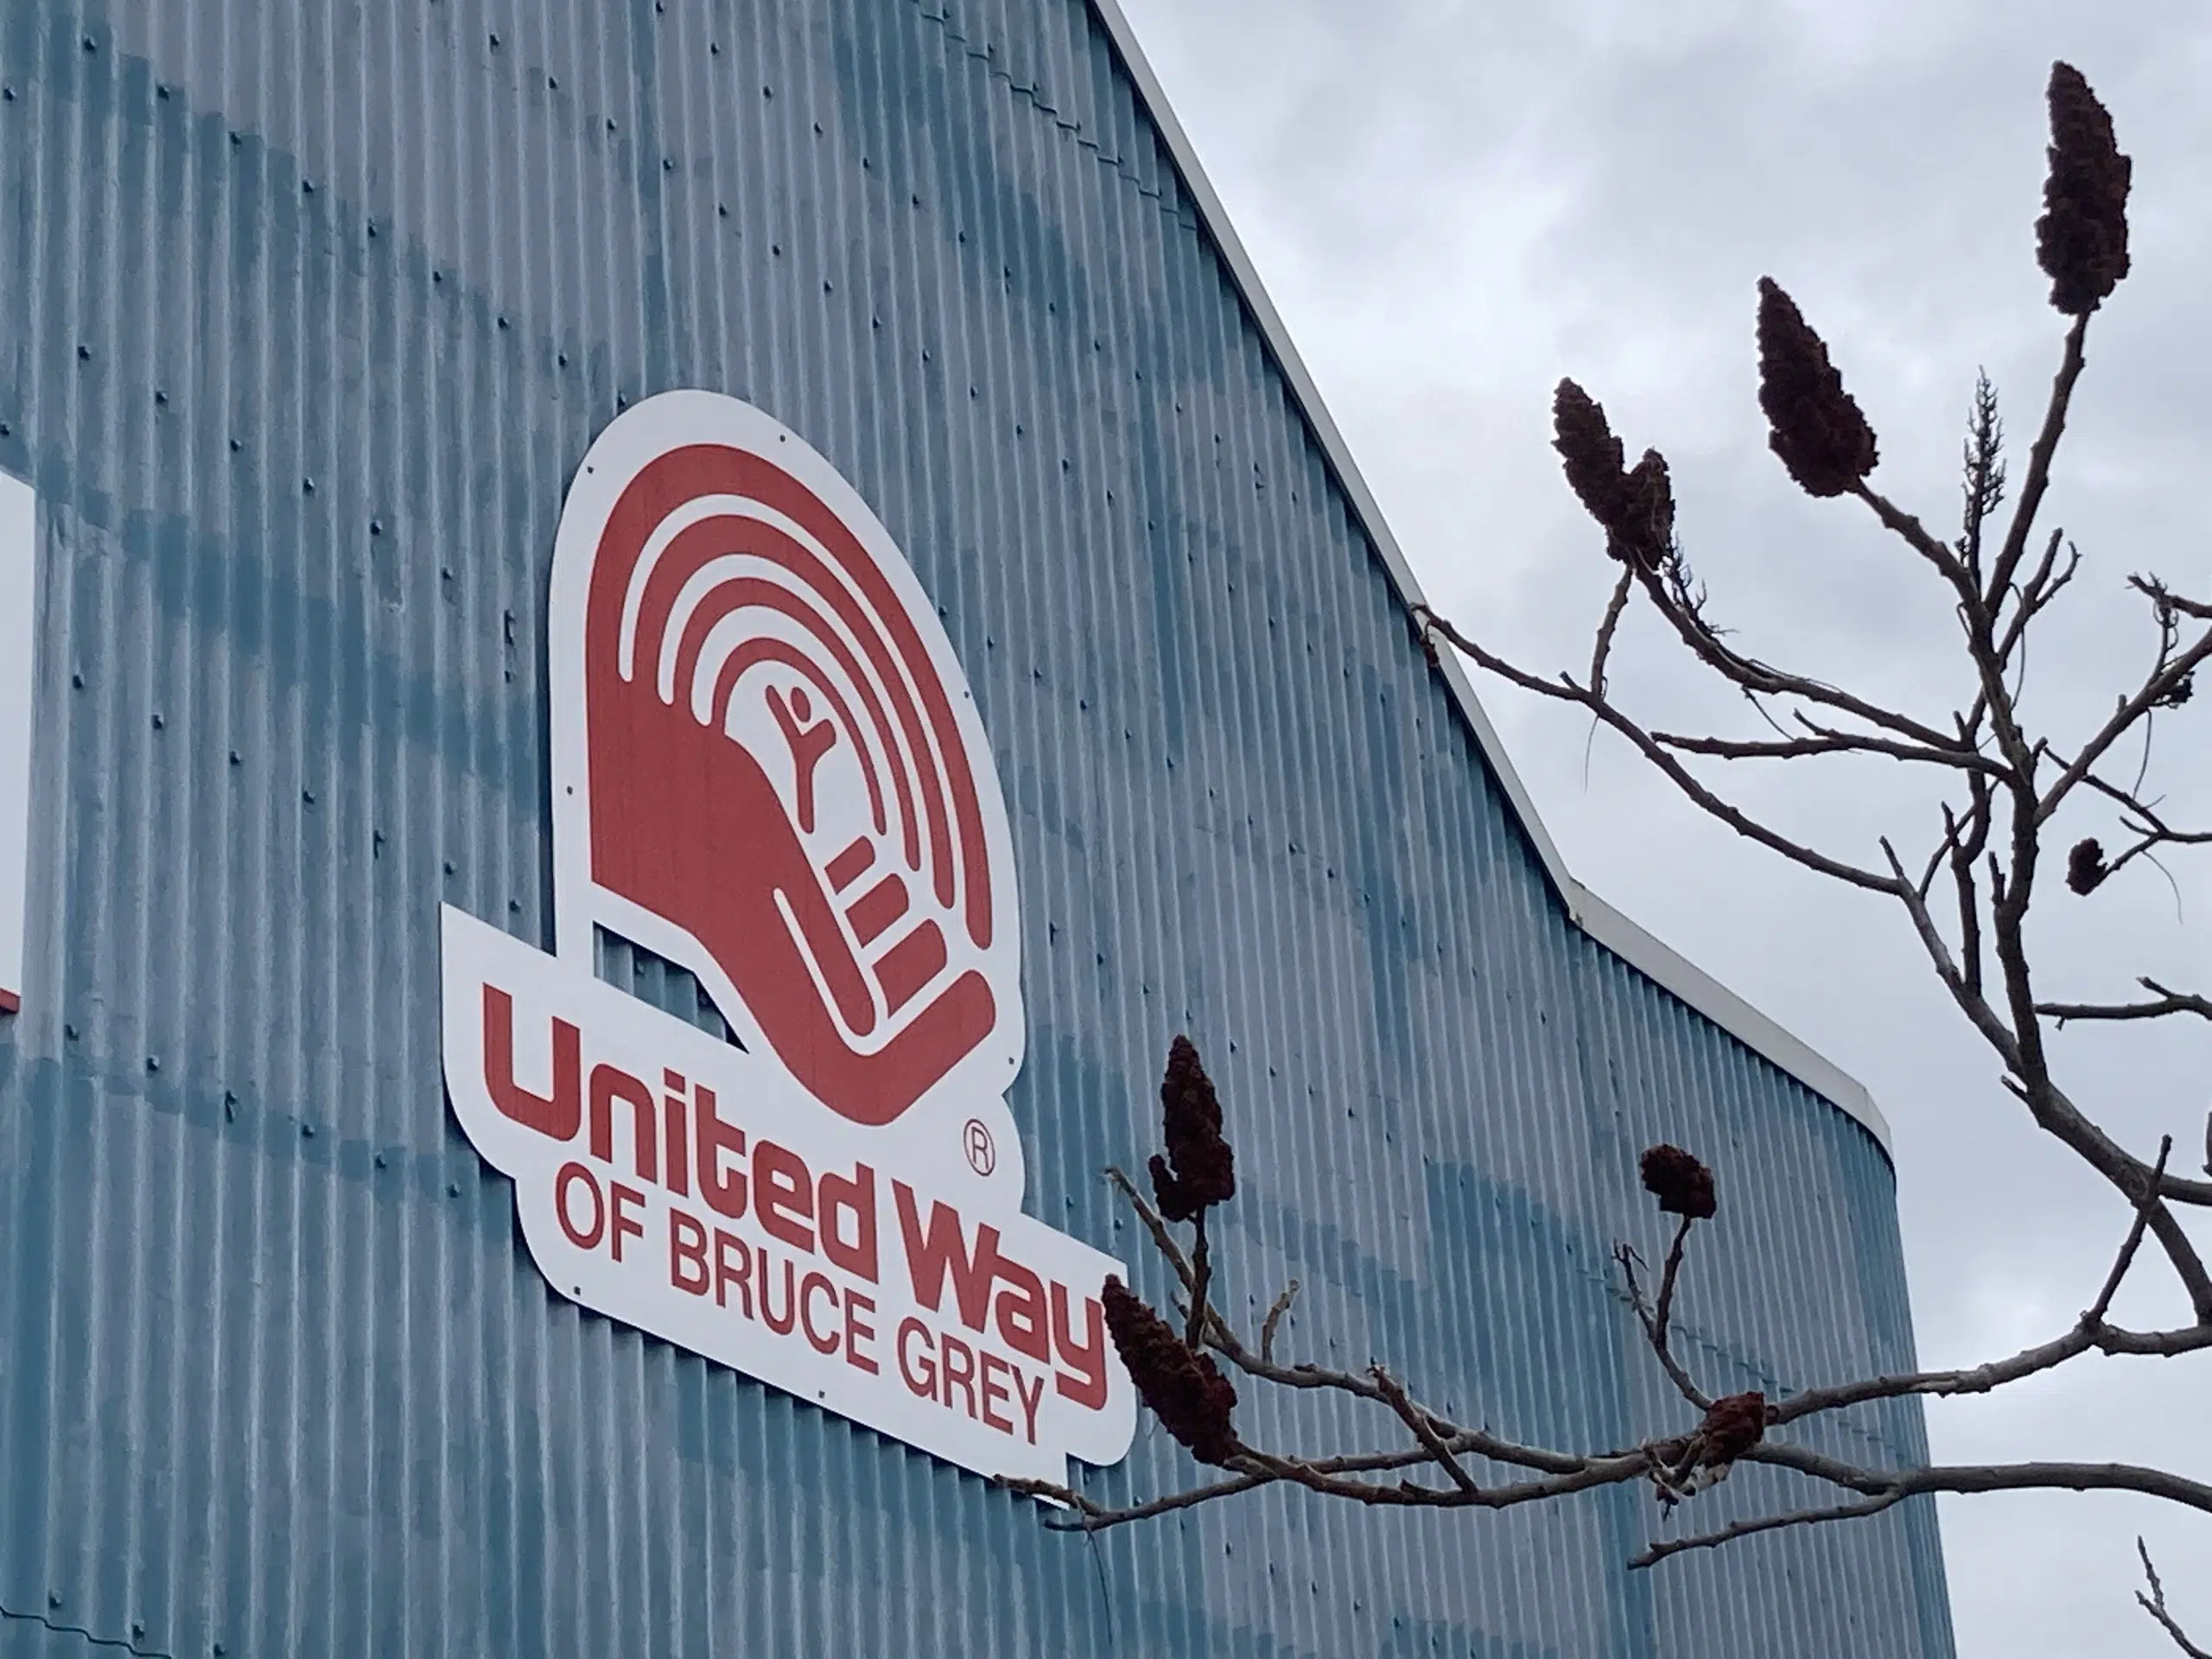 United Way of Bruce Grey Distributes Over 700 Pounds Of Beef To Area Food Programs